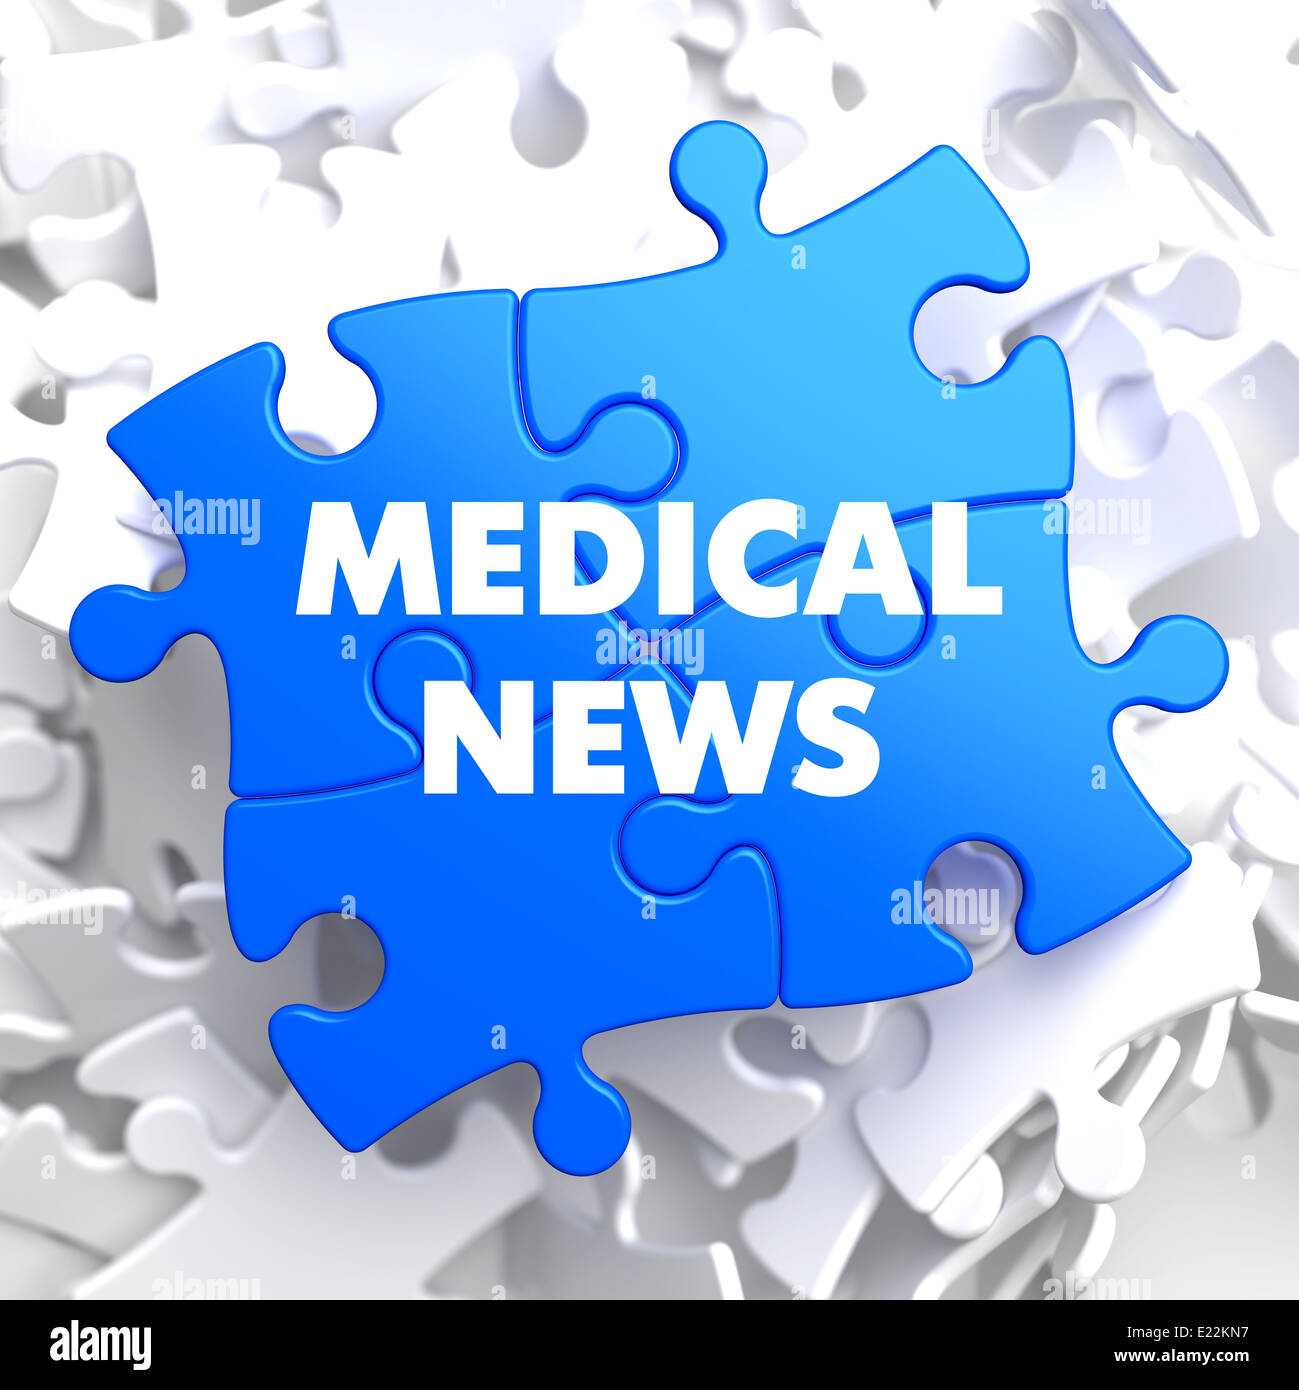 Medical News on Blue Puzzle. Stock Photo